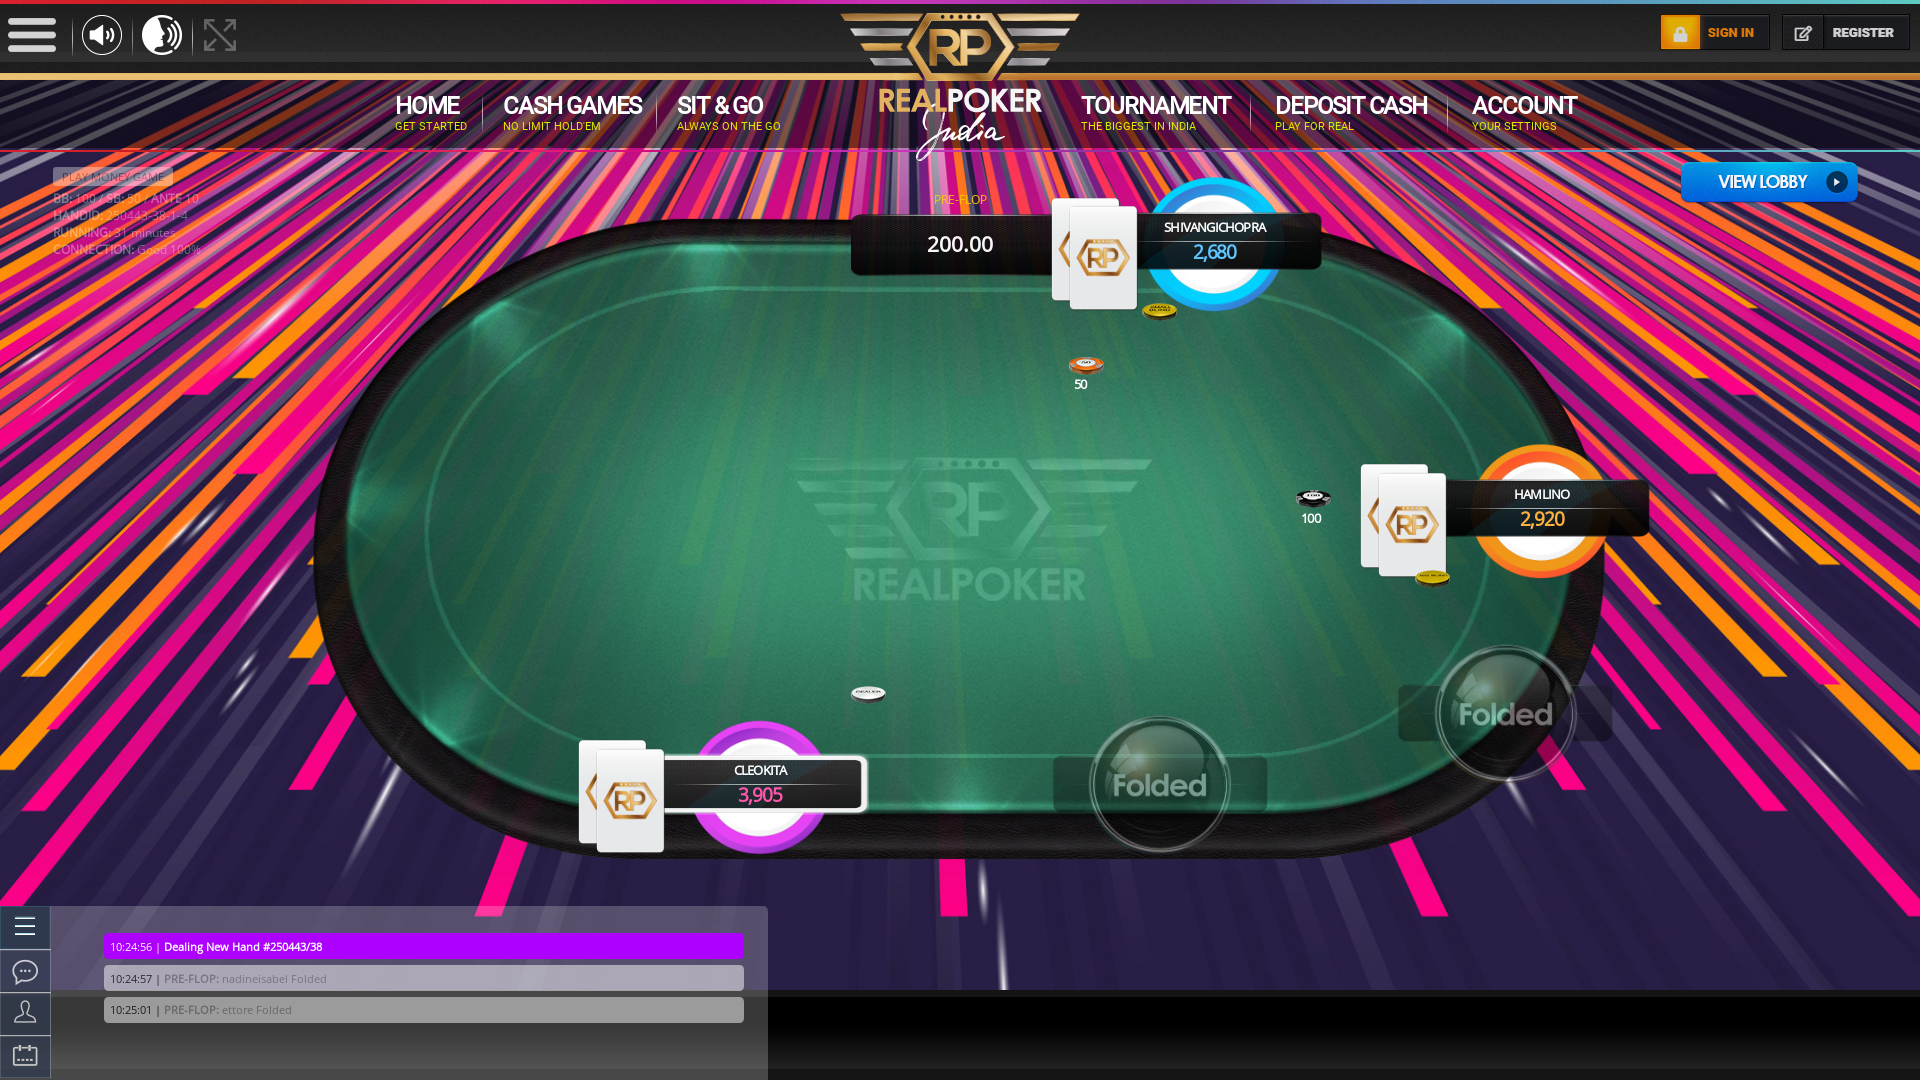 Real Indian poker on a 10 player table in the 3 game